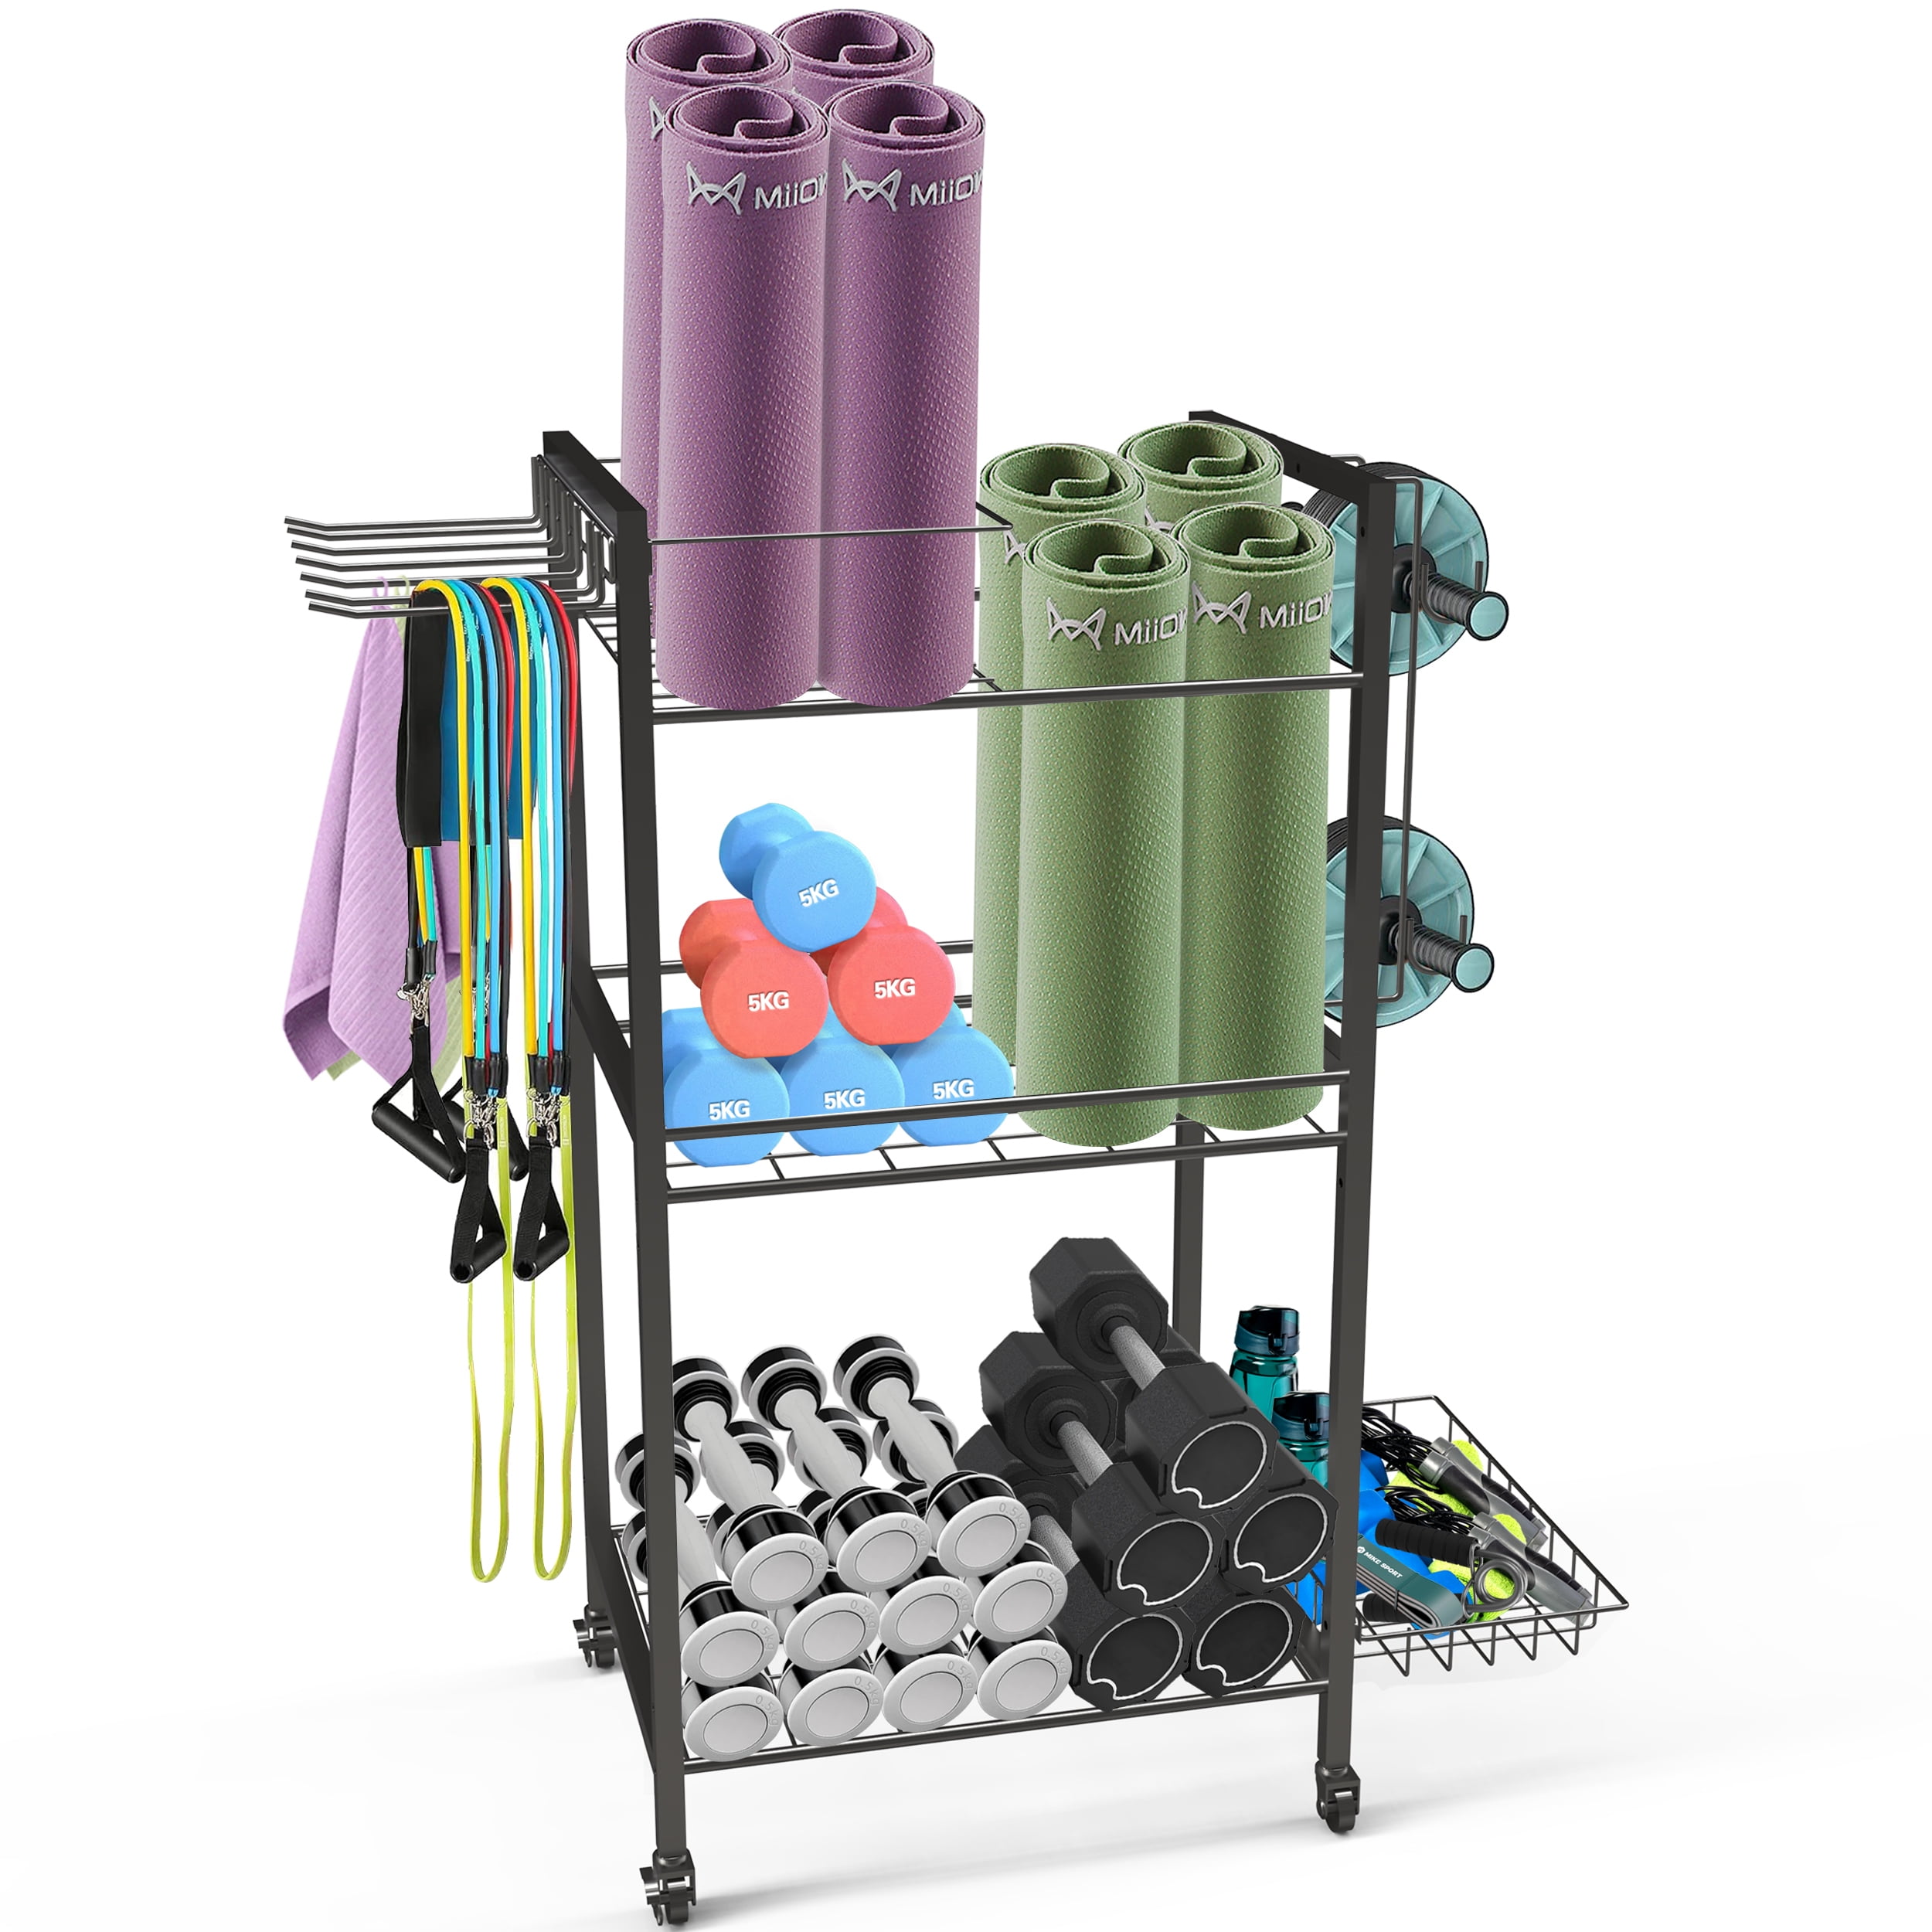 Exercise Mat Storage Cart Organize Fitness Mats | Power Systems